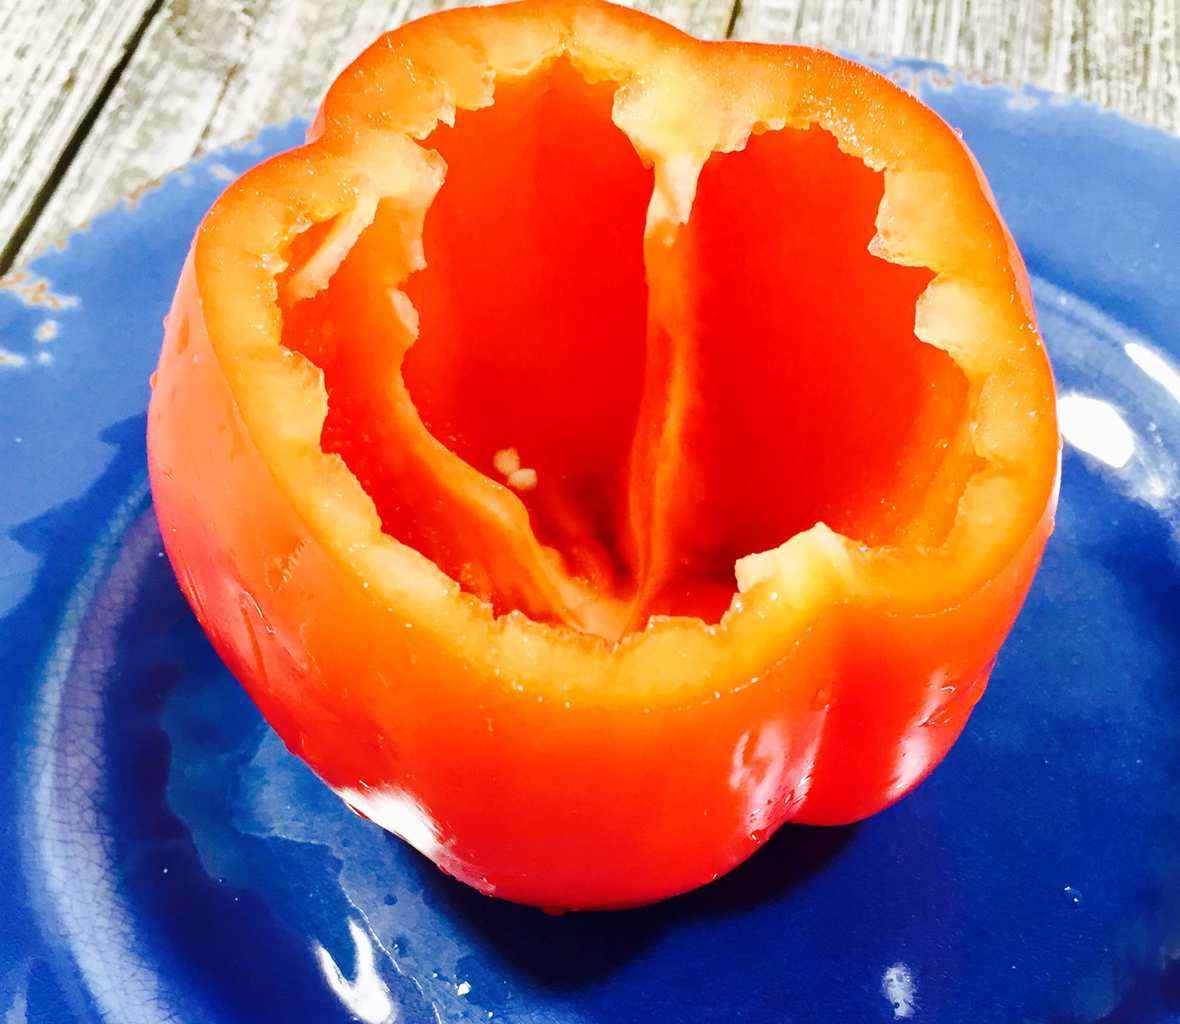 Red pepper on a blue plate